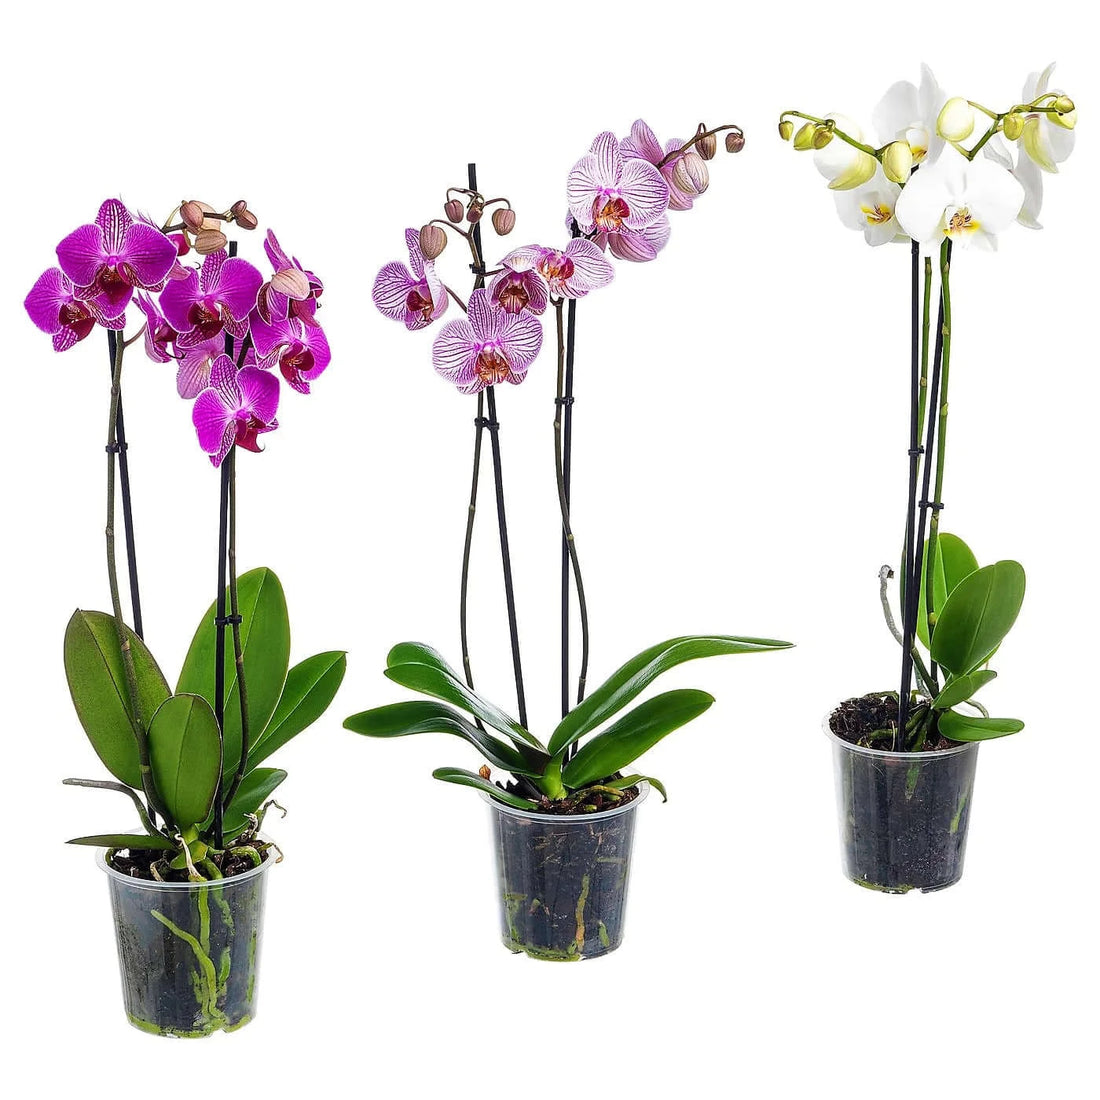 Moth Orchids, Phalaenopsis orchids